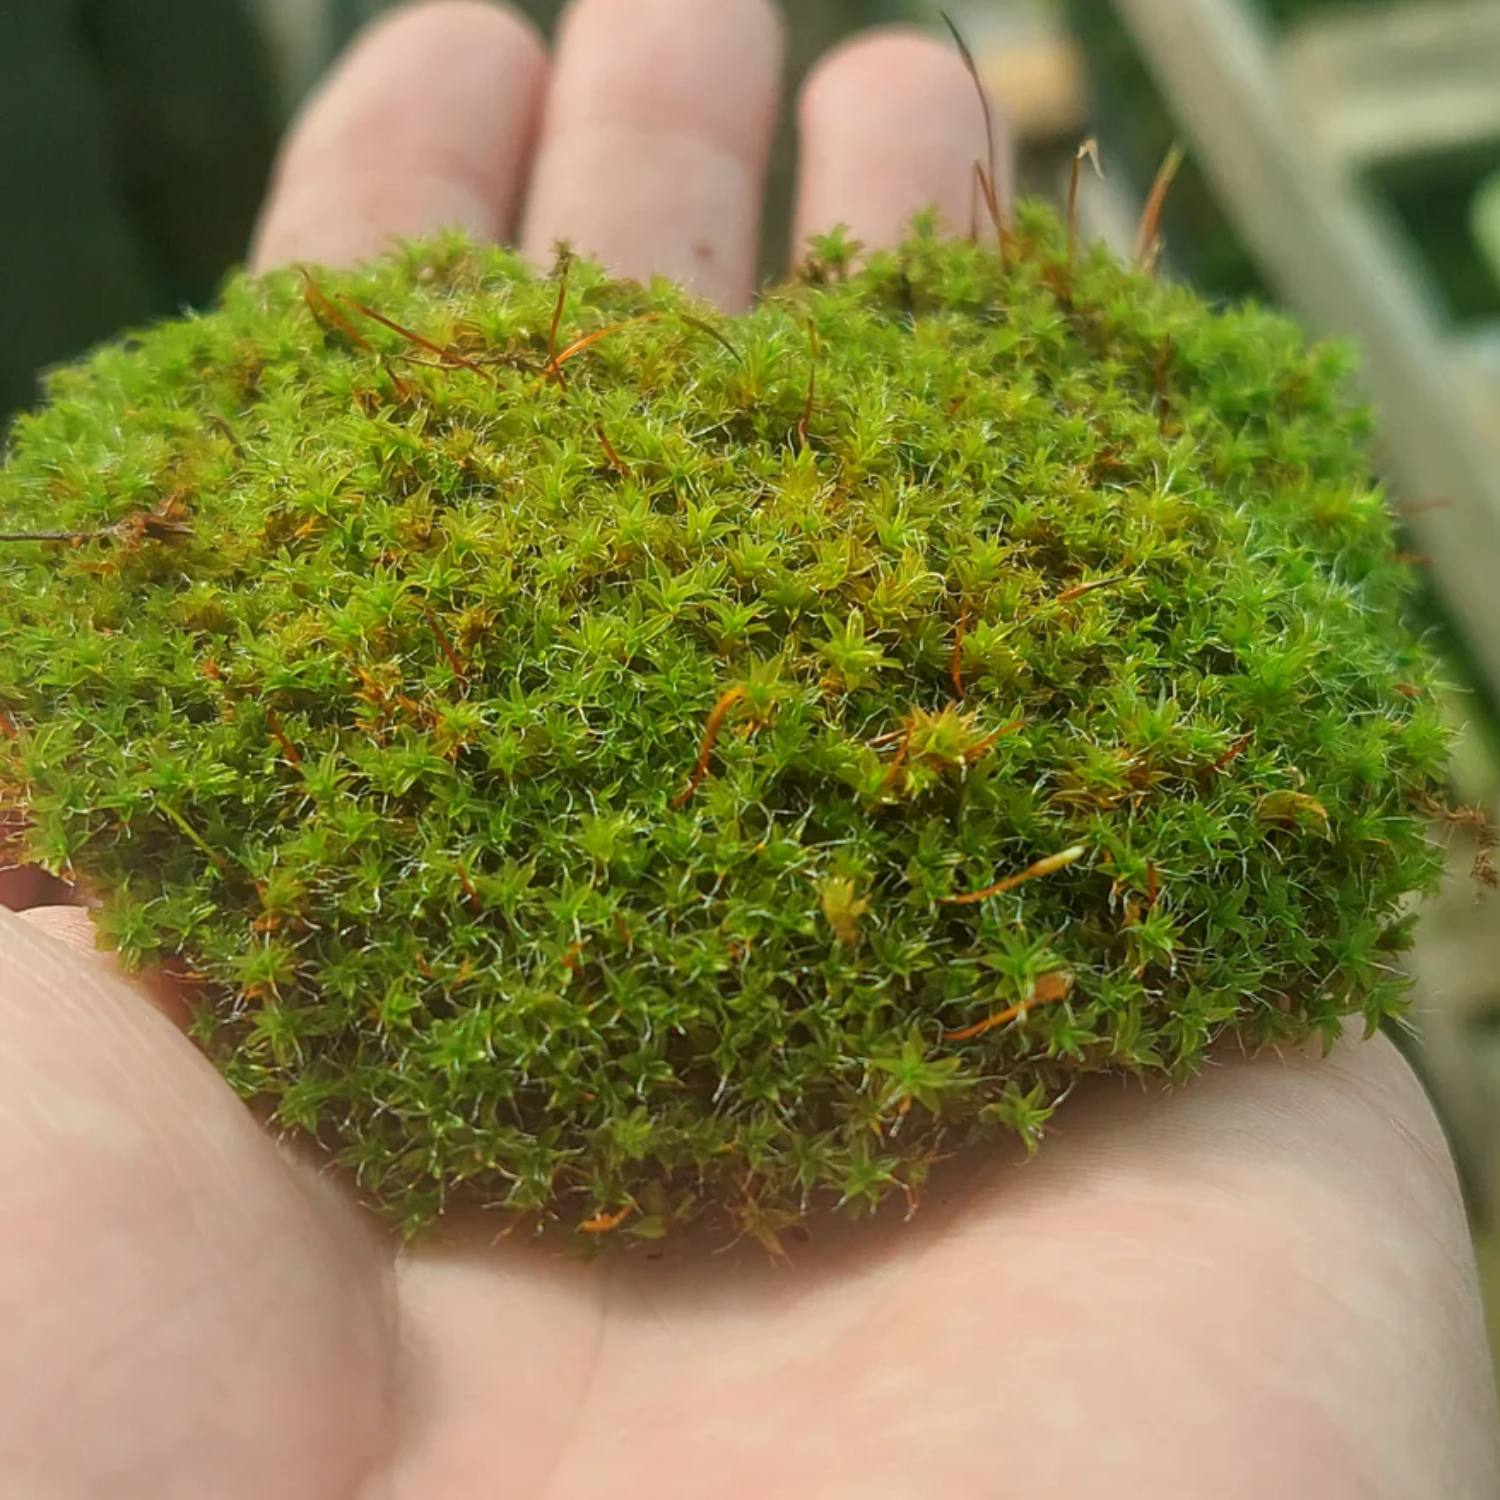 How to care for star moss